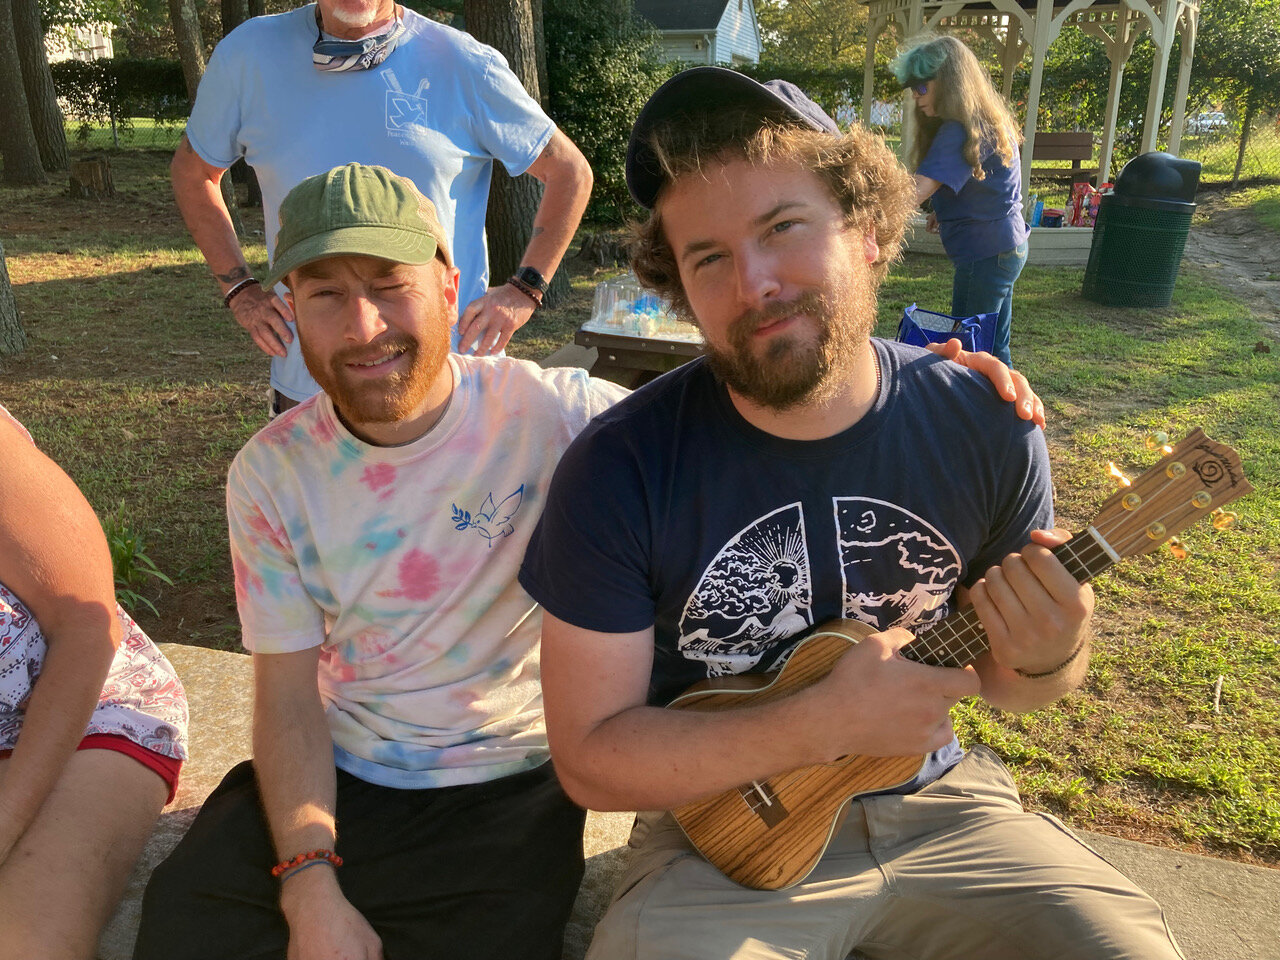  Eric Rhiel and Joshua Salt, who traveled to the celebration from Wisconsin (walking from Phili airport!), shared music, stories and their plans to produce a play based on Peace Pilgrim’s life.  